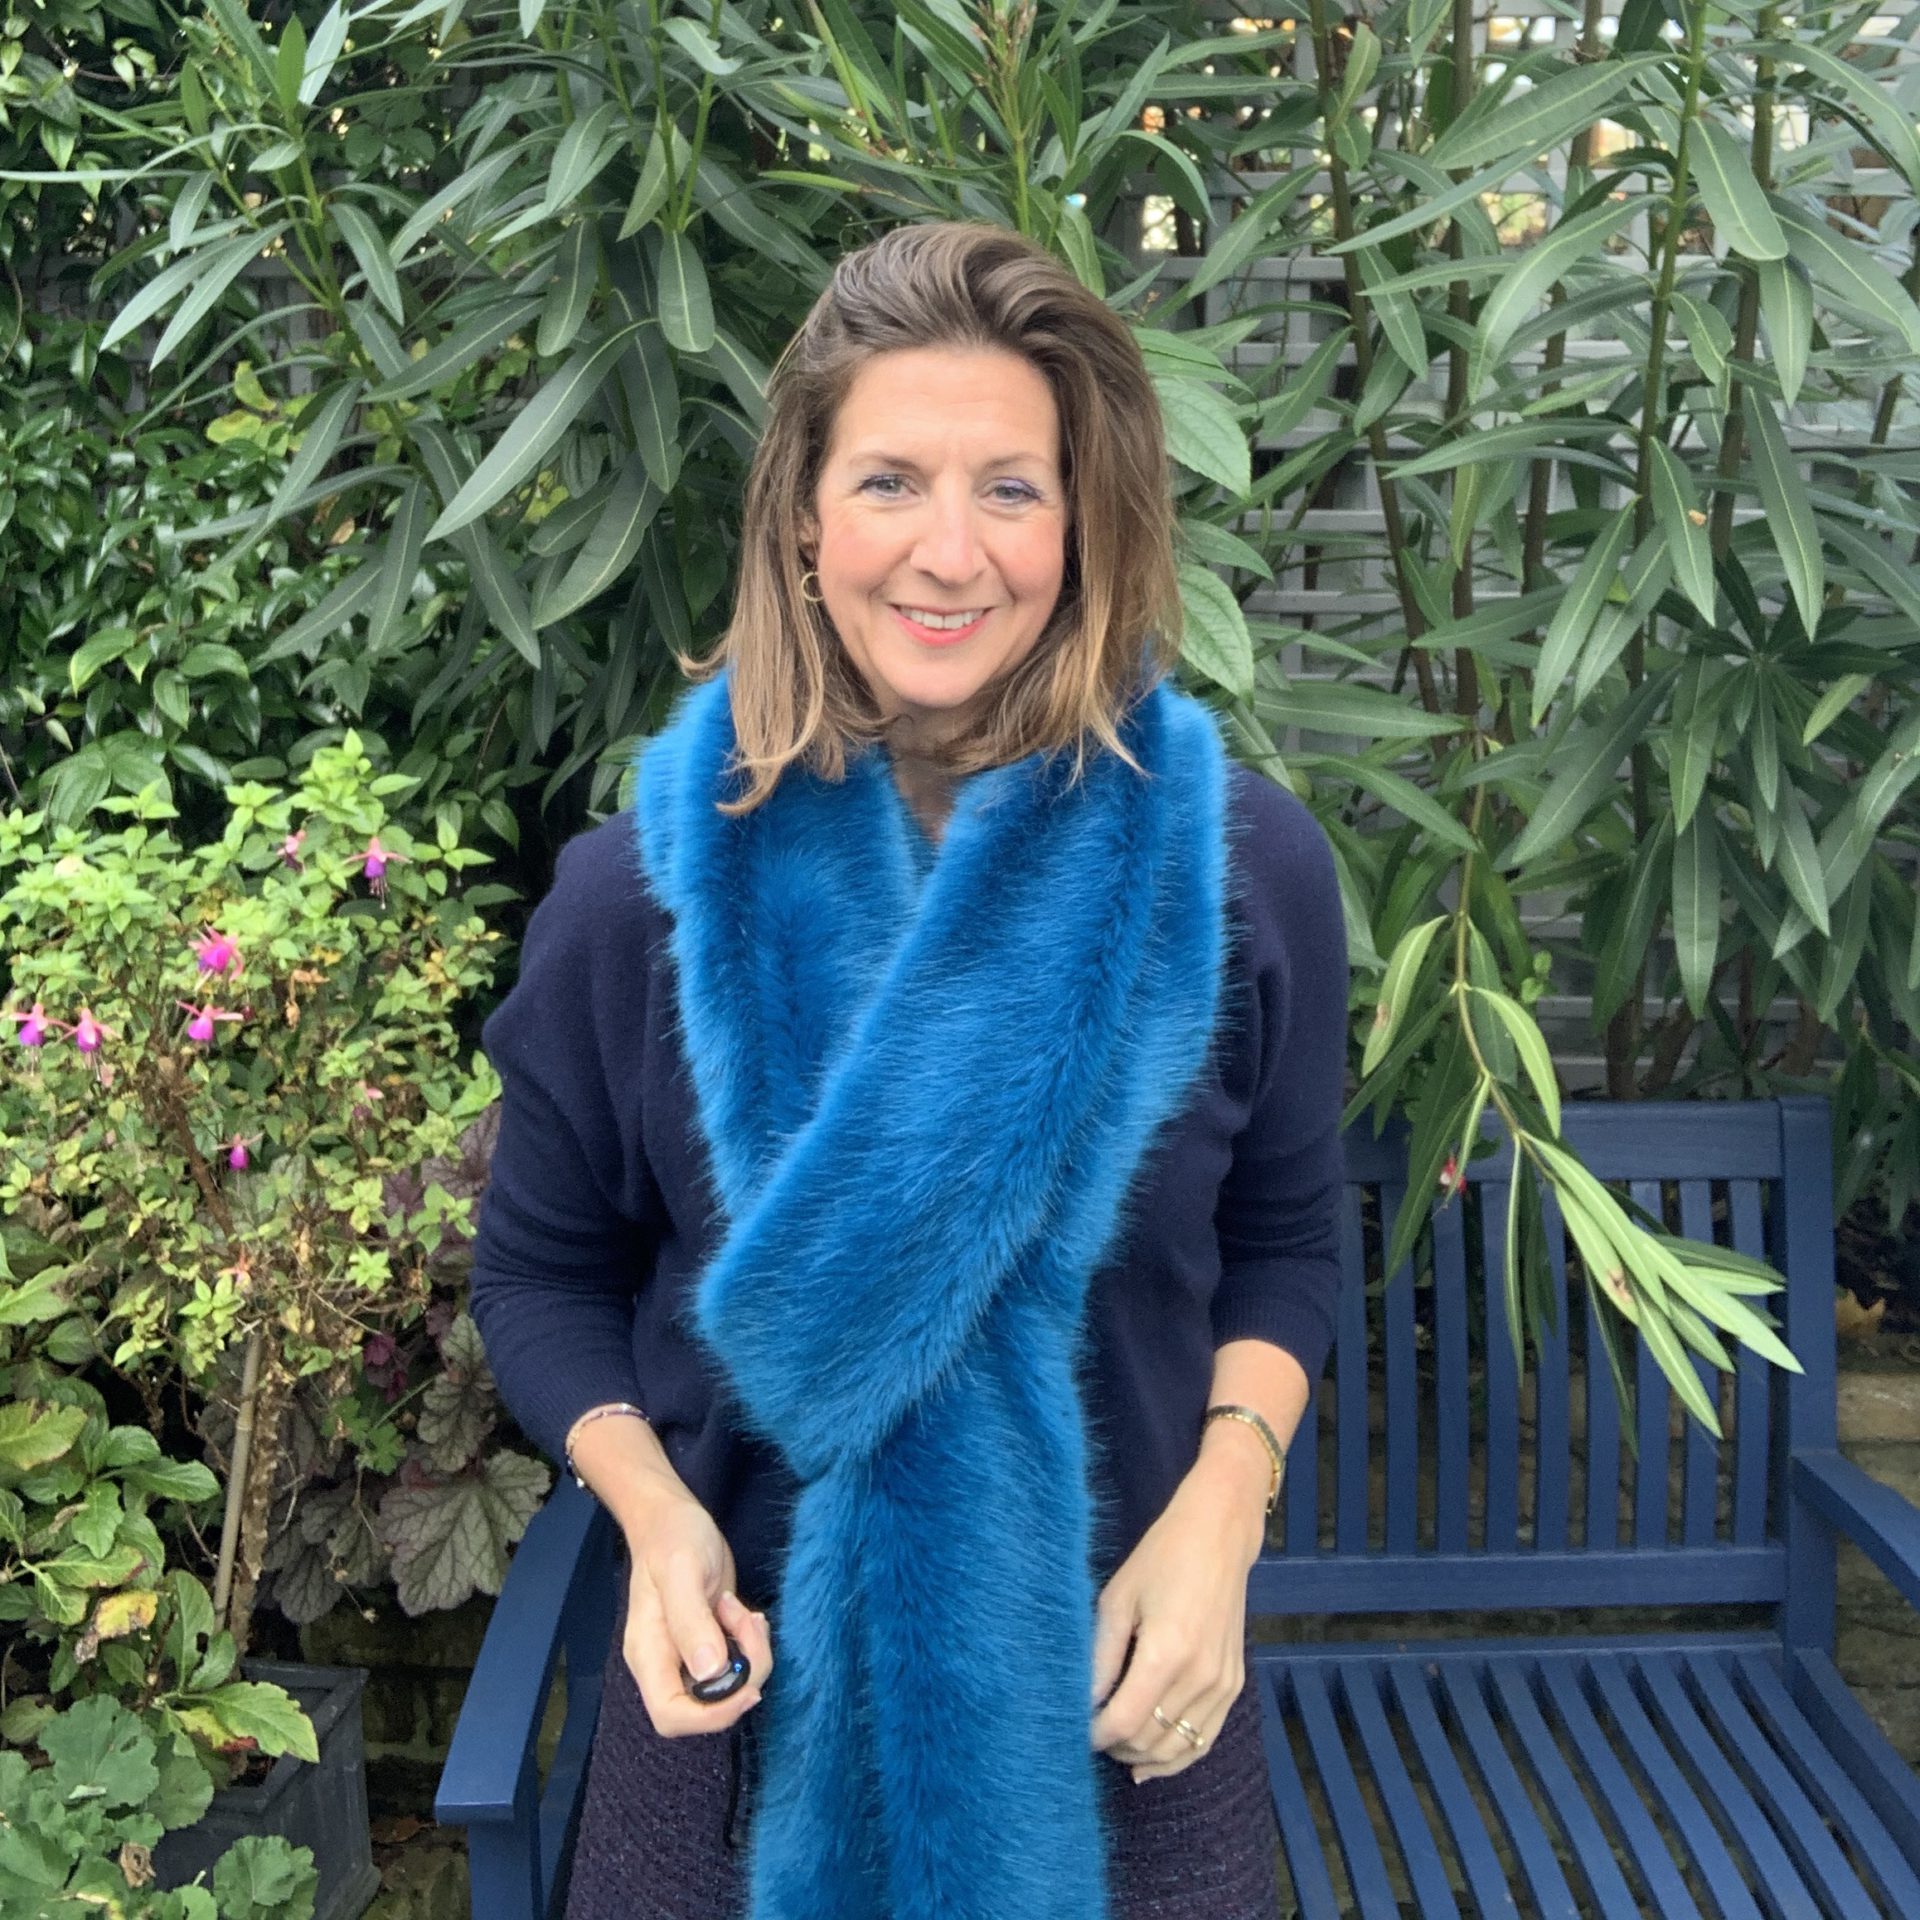 Faux fur extra-long scarf in bright teal - Cornflower Blue - Accessories  with Style